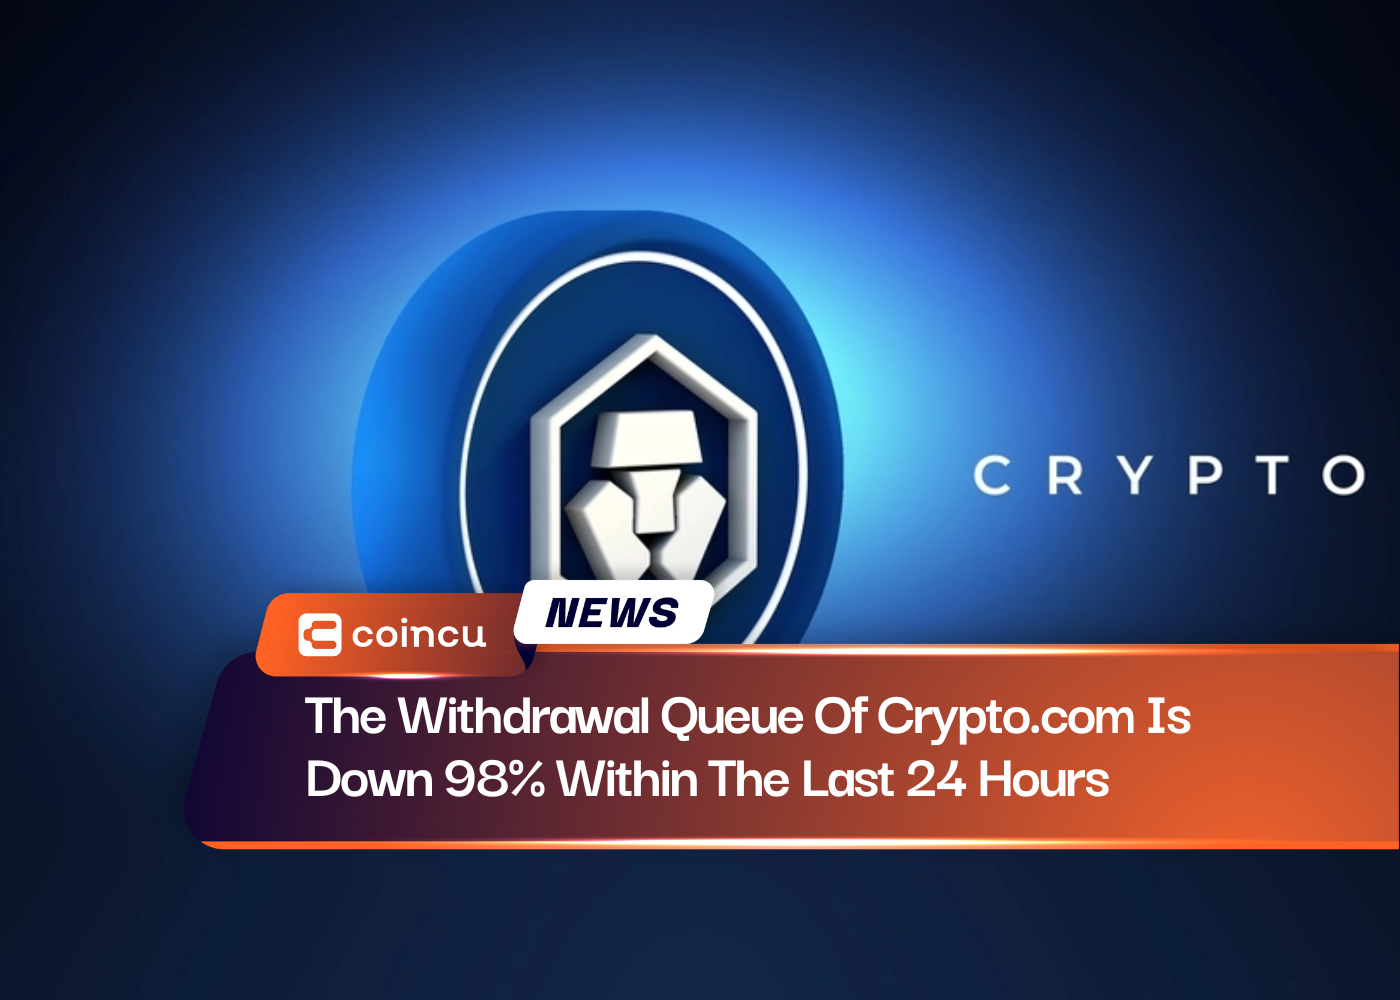 The Withdrawal Queue Of Crypto.com Is Down 98% Within The Last 24 Hours